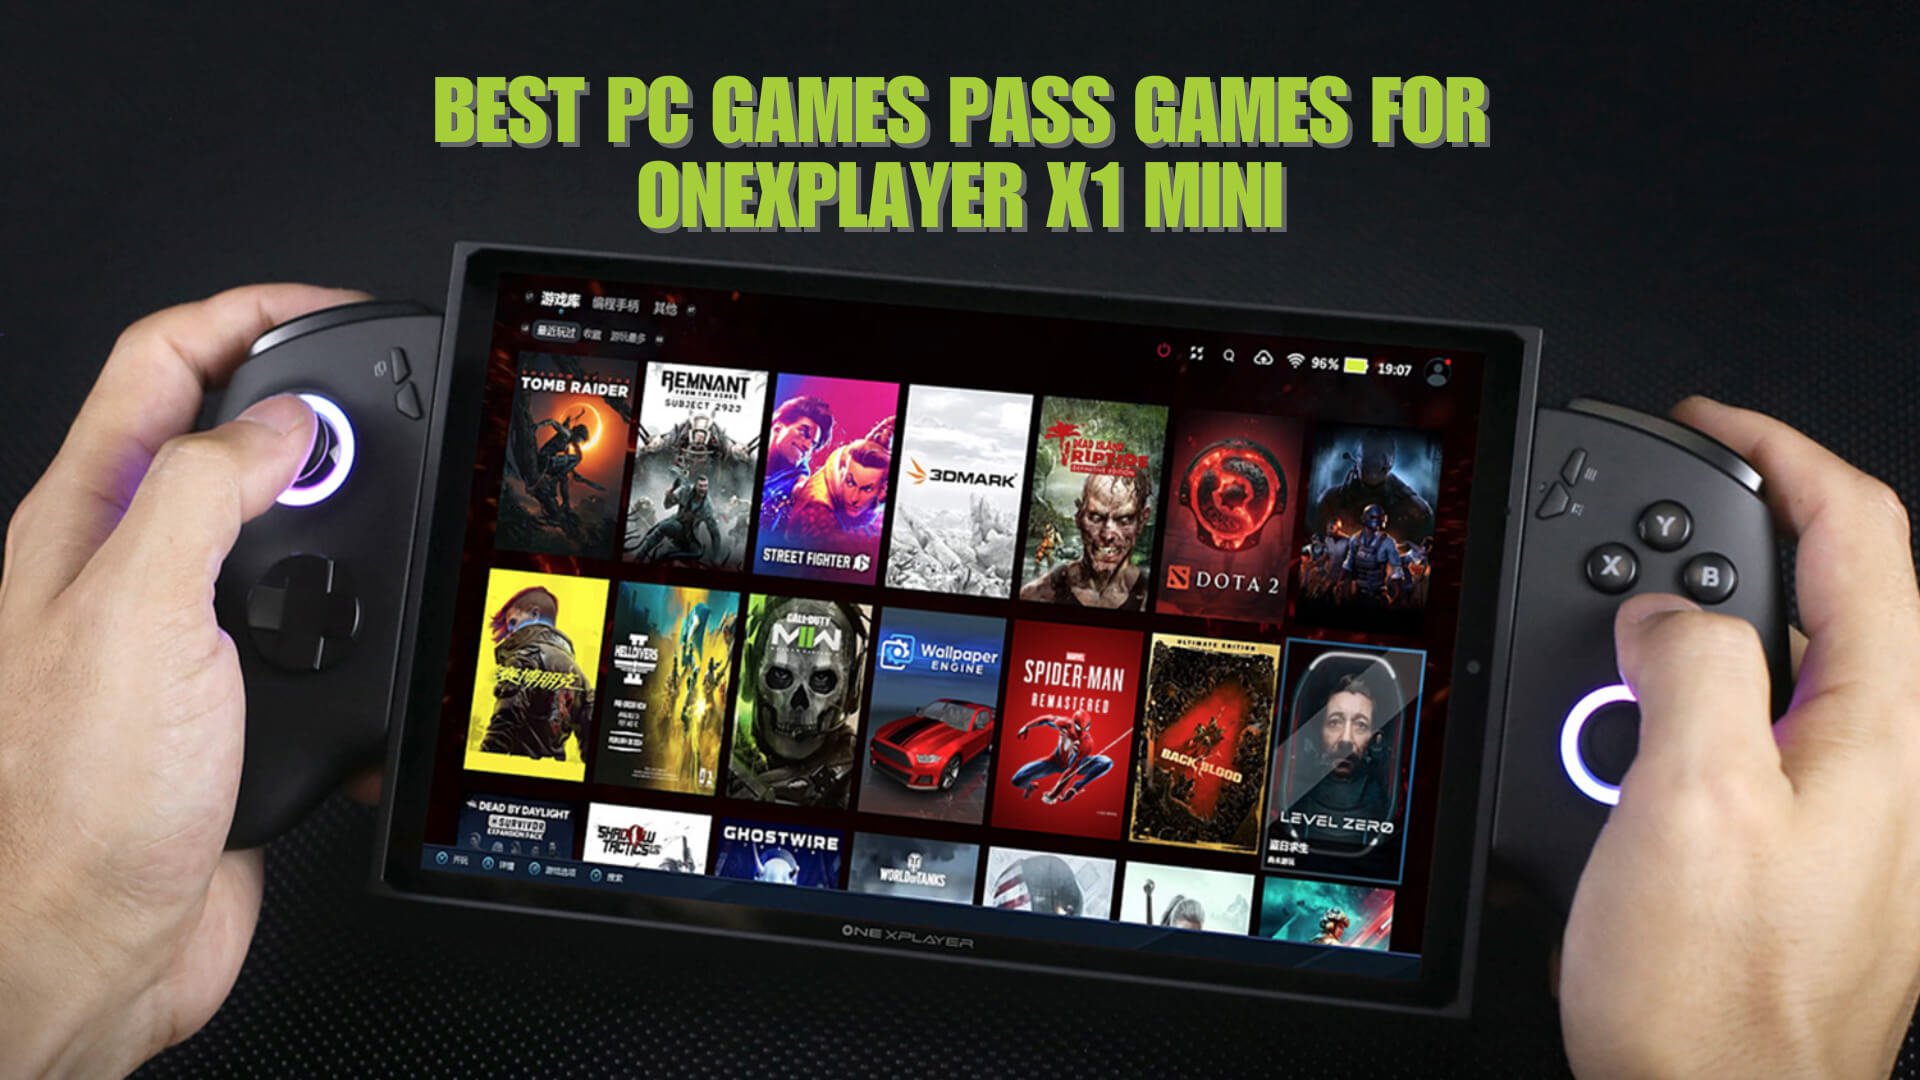 Best PC Game Pass games for the ONEXPLAYER X1 Mini handheld gaming PC